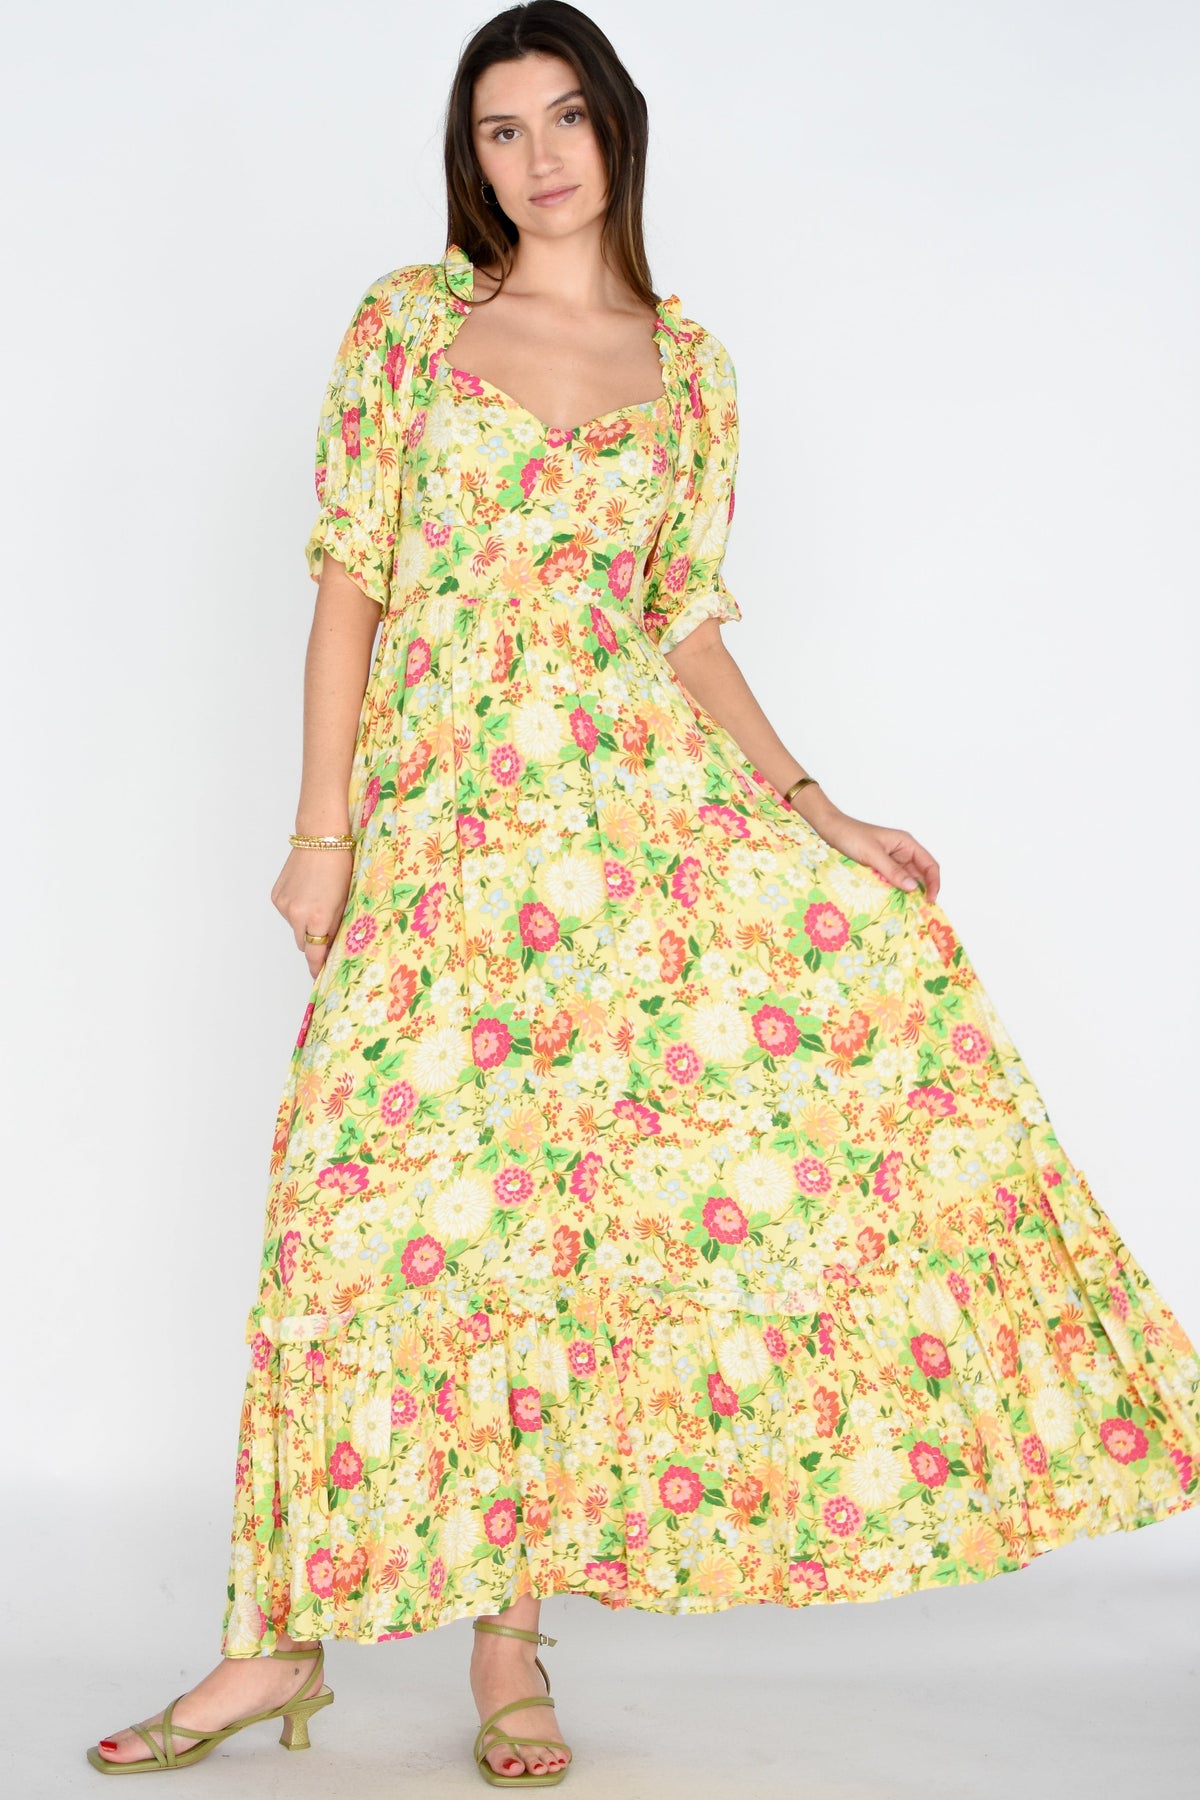  Analyzing image     19354743_3c2b8749-4132-42ad-8f98-8d244697a2ef  1000 × 1500px  yellow floral printed maxi dress with puff sleeves